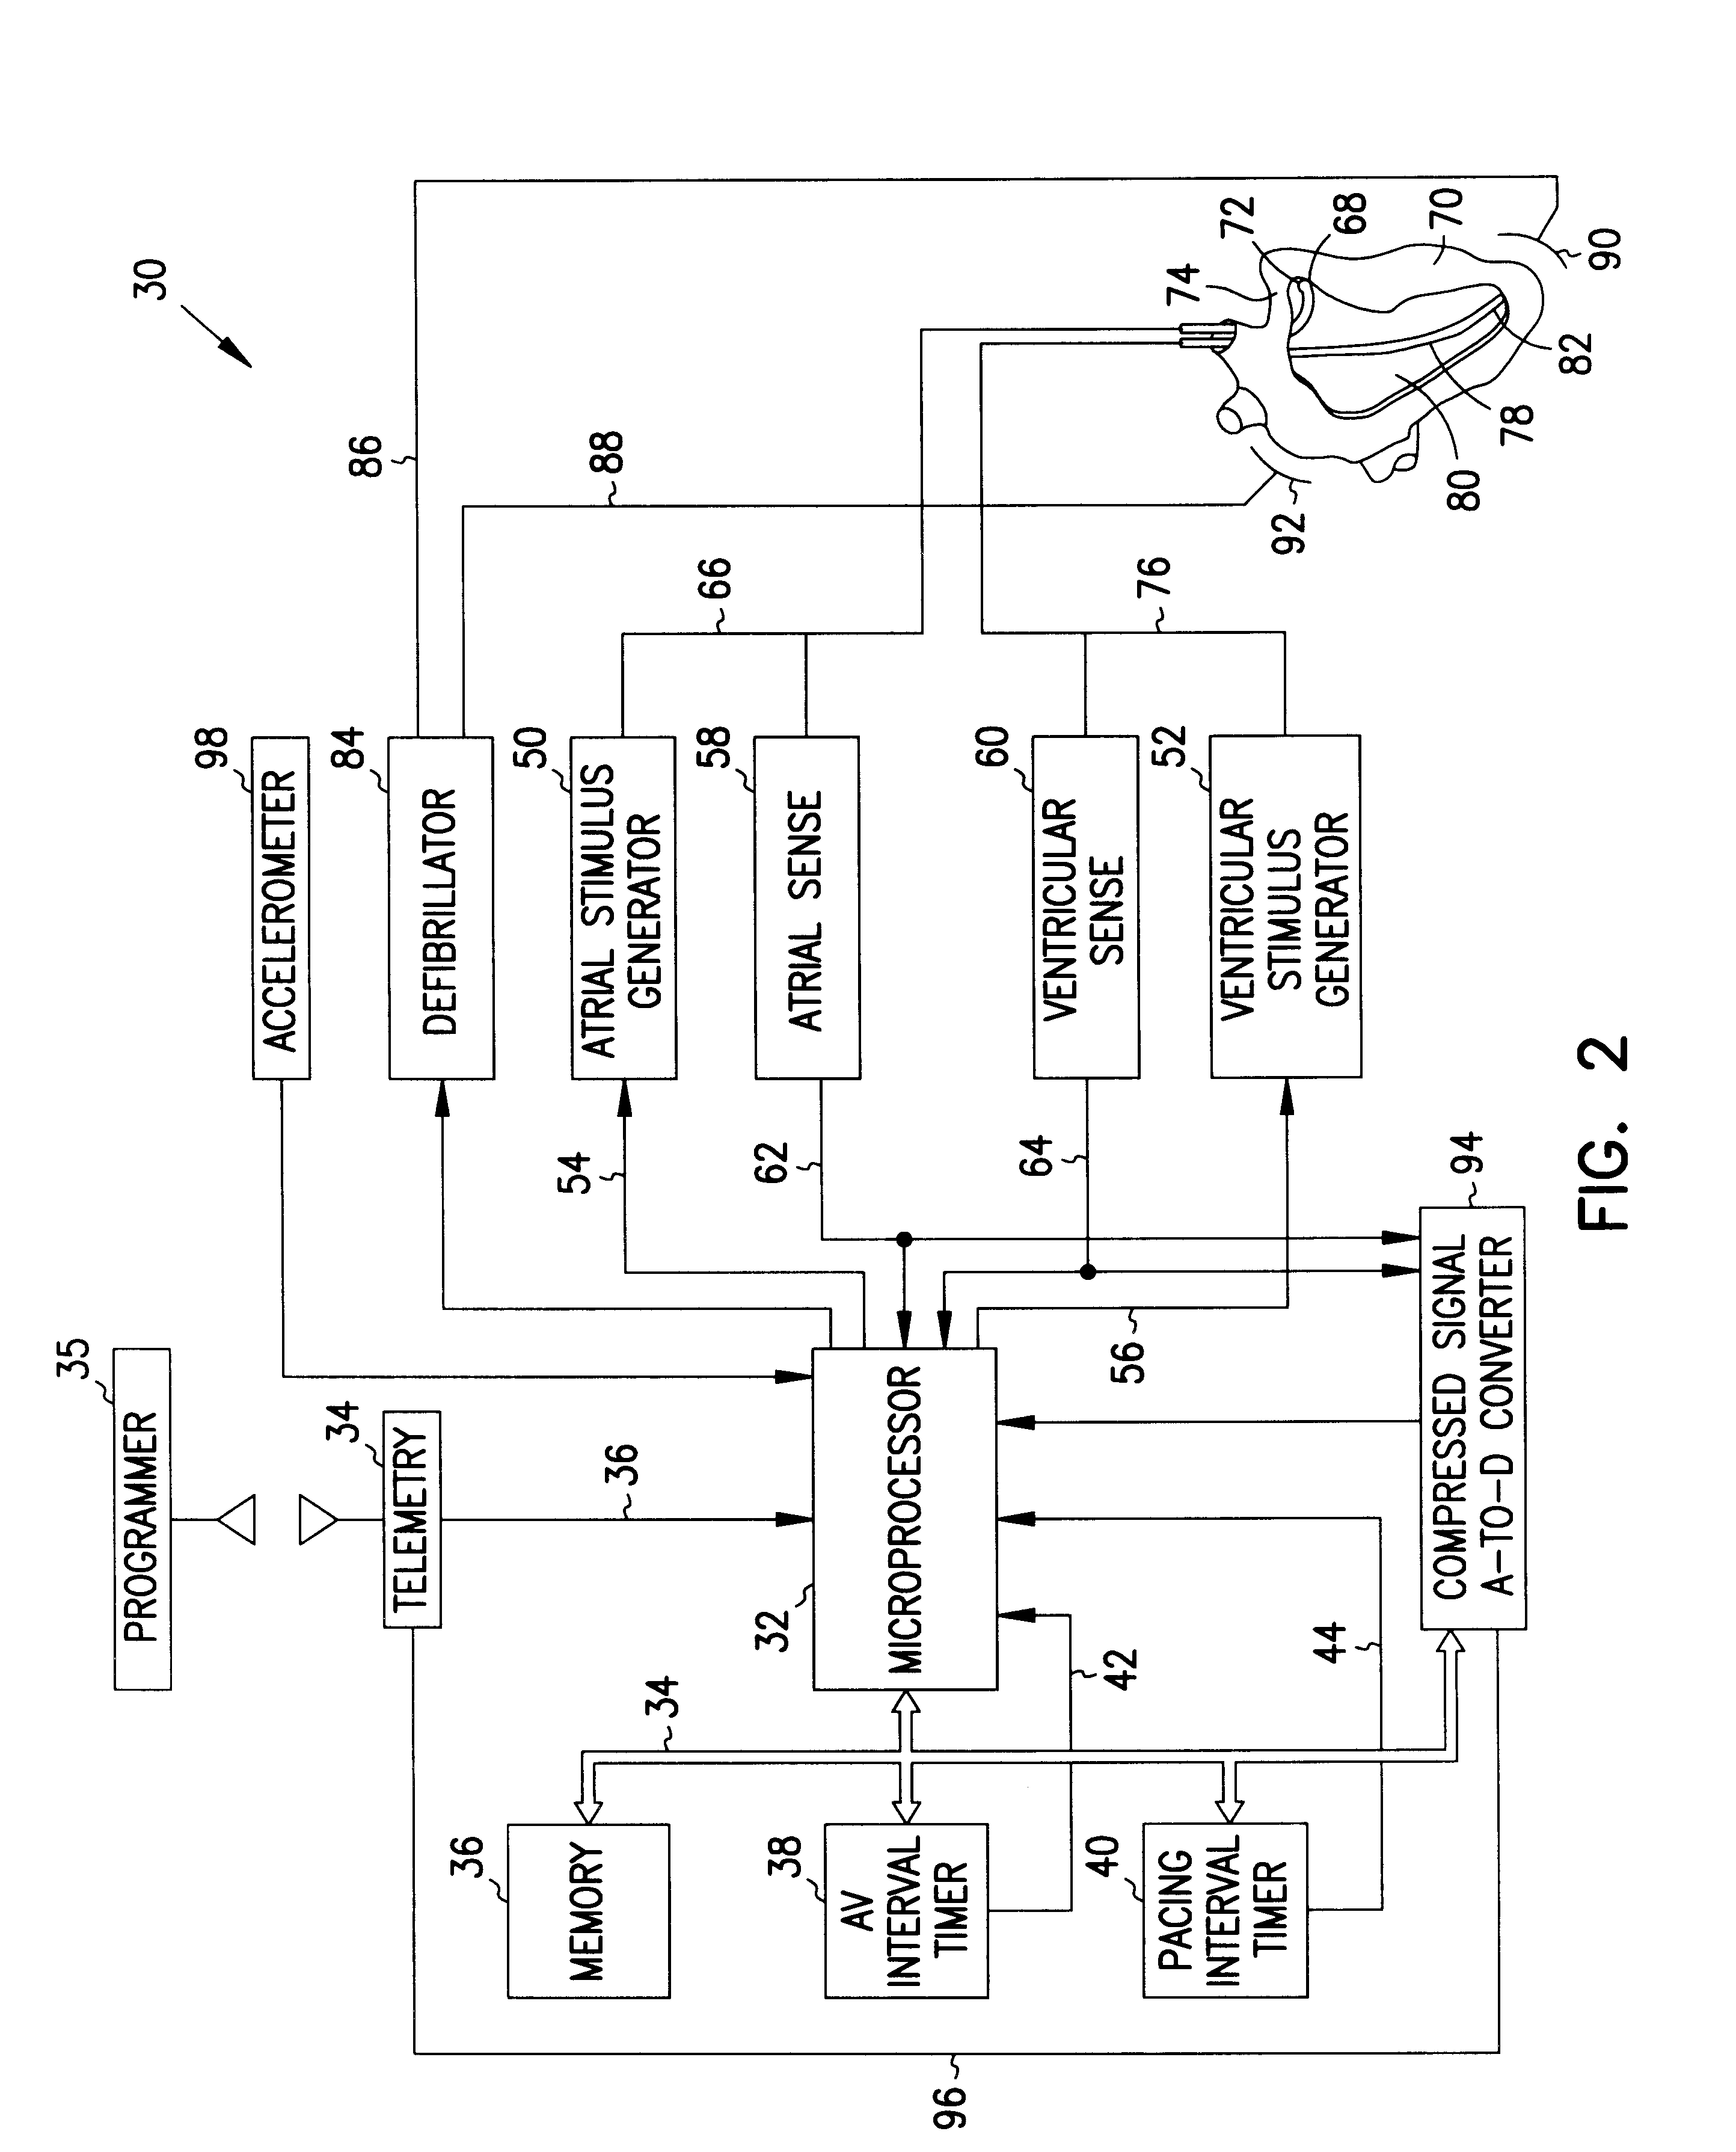 Methods and apparatus for tachycardia rate hysteresis for dual-chamber cardiac stimulators